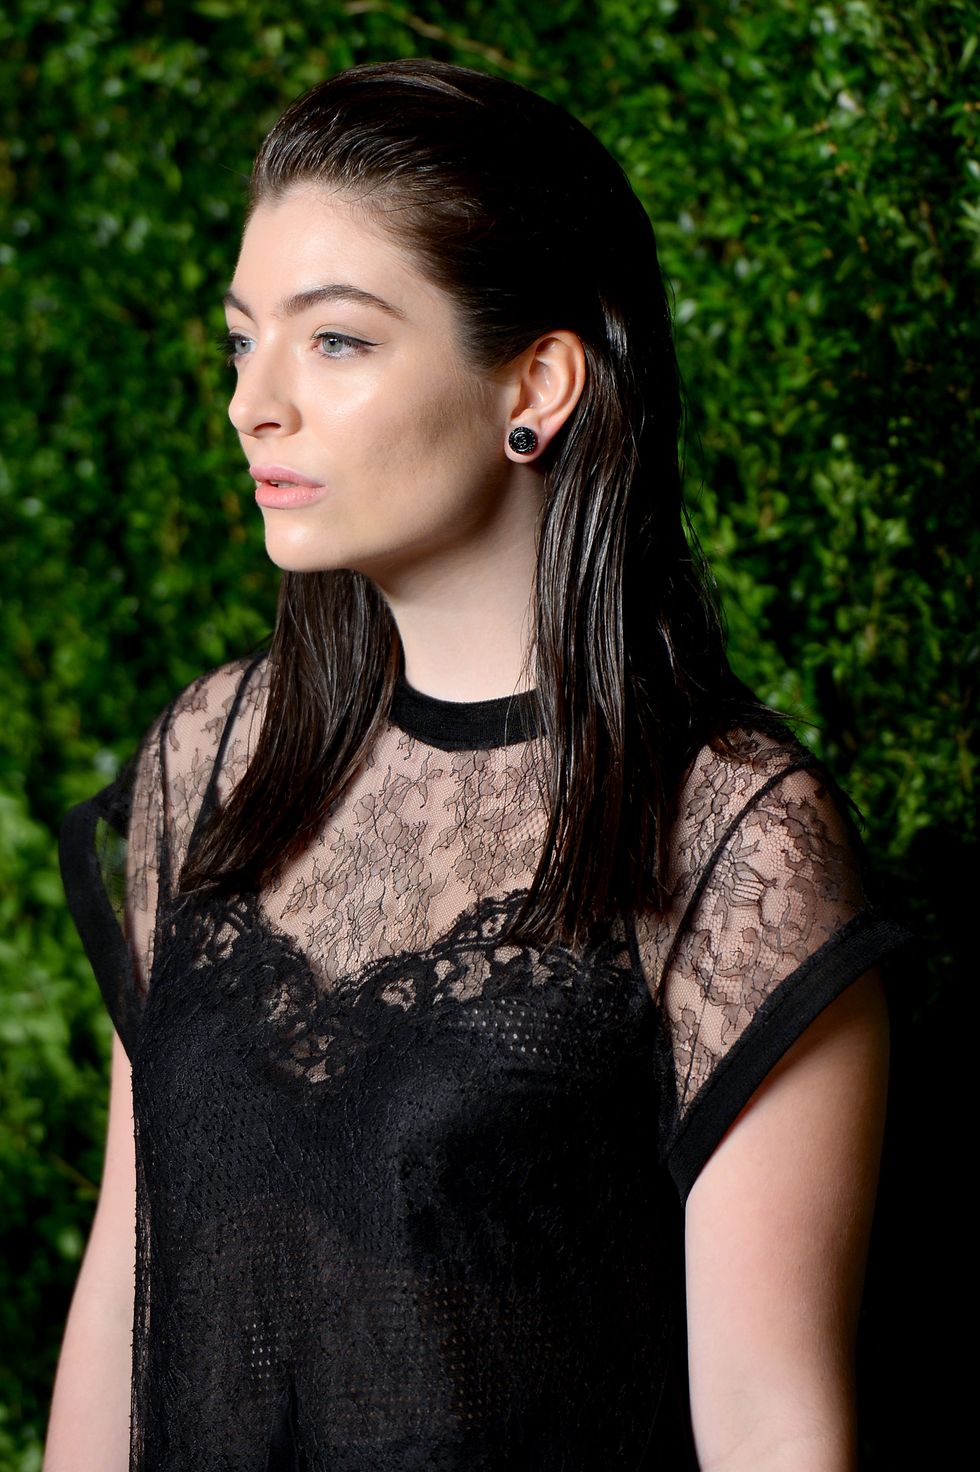 Lorde with straight hair